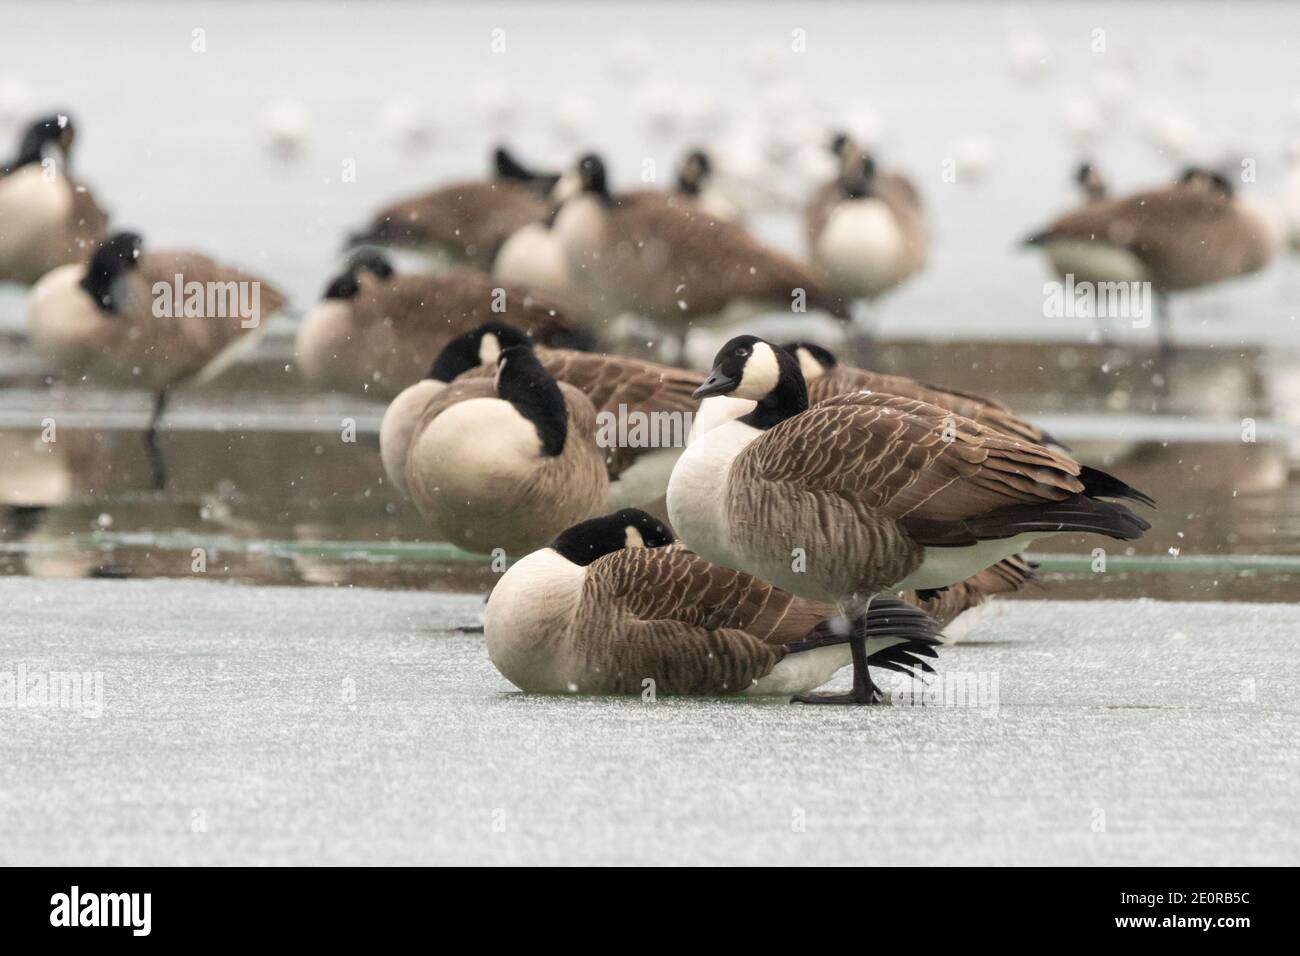 Bolton, England. 2nd Jan 2021. UK Weather. Moses Gate Country Park. A flock of Canada Geese stand on the frozen lake with the one closest to the camera showing curiosity at the falling snow. Credit: Callum Fraser/Alamy Live News Stock Photo